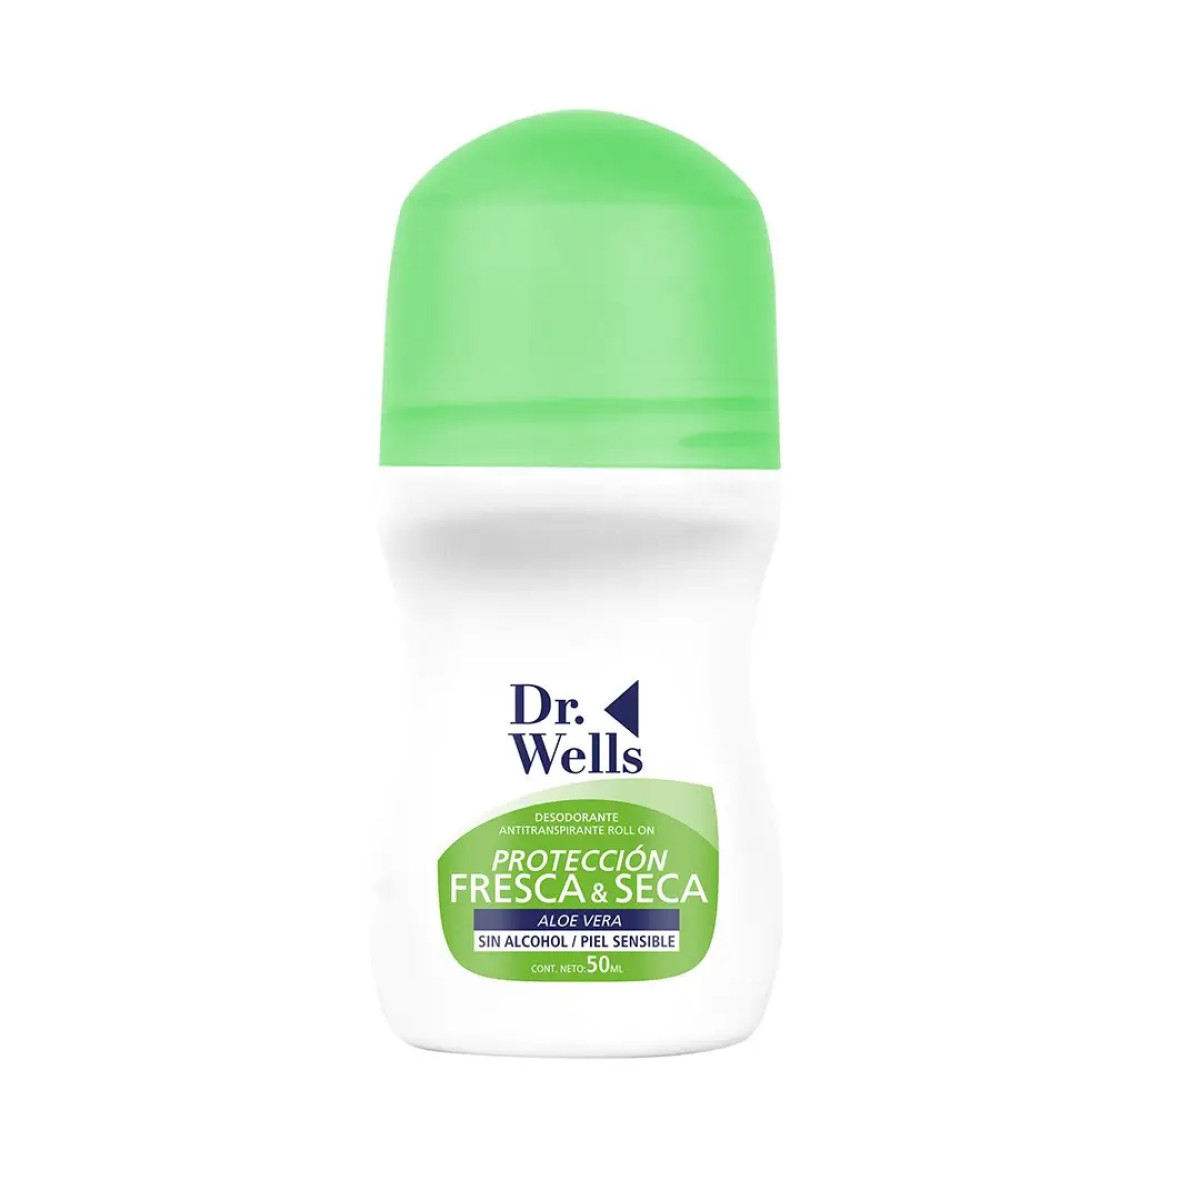 DR WELLS DEO ROLLON 50 ML PROT